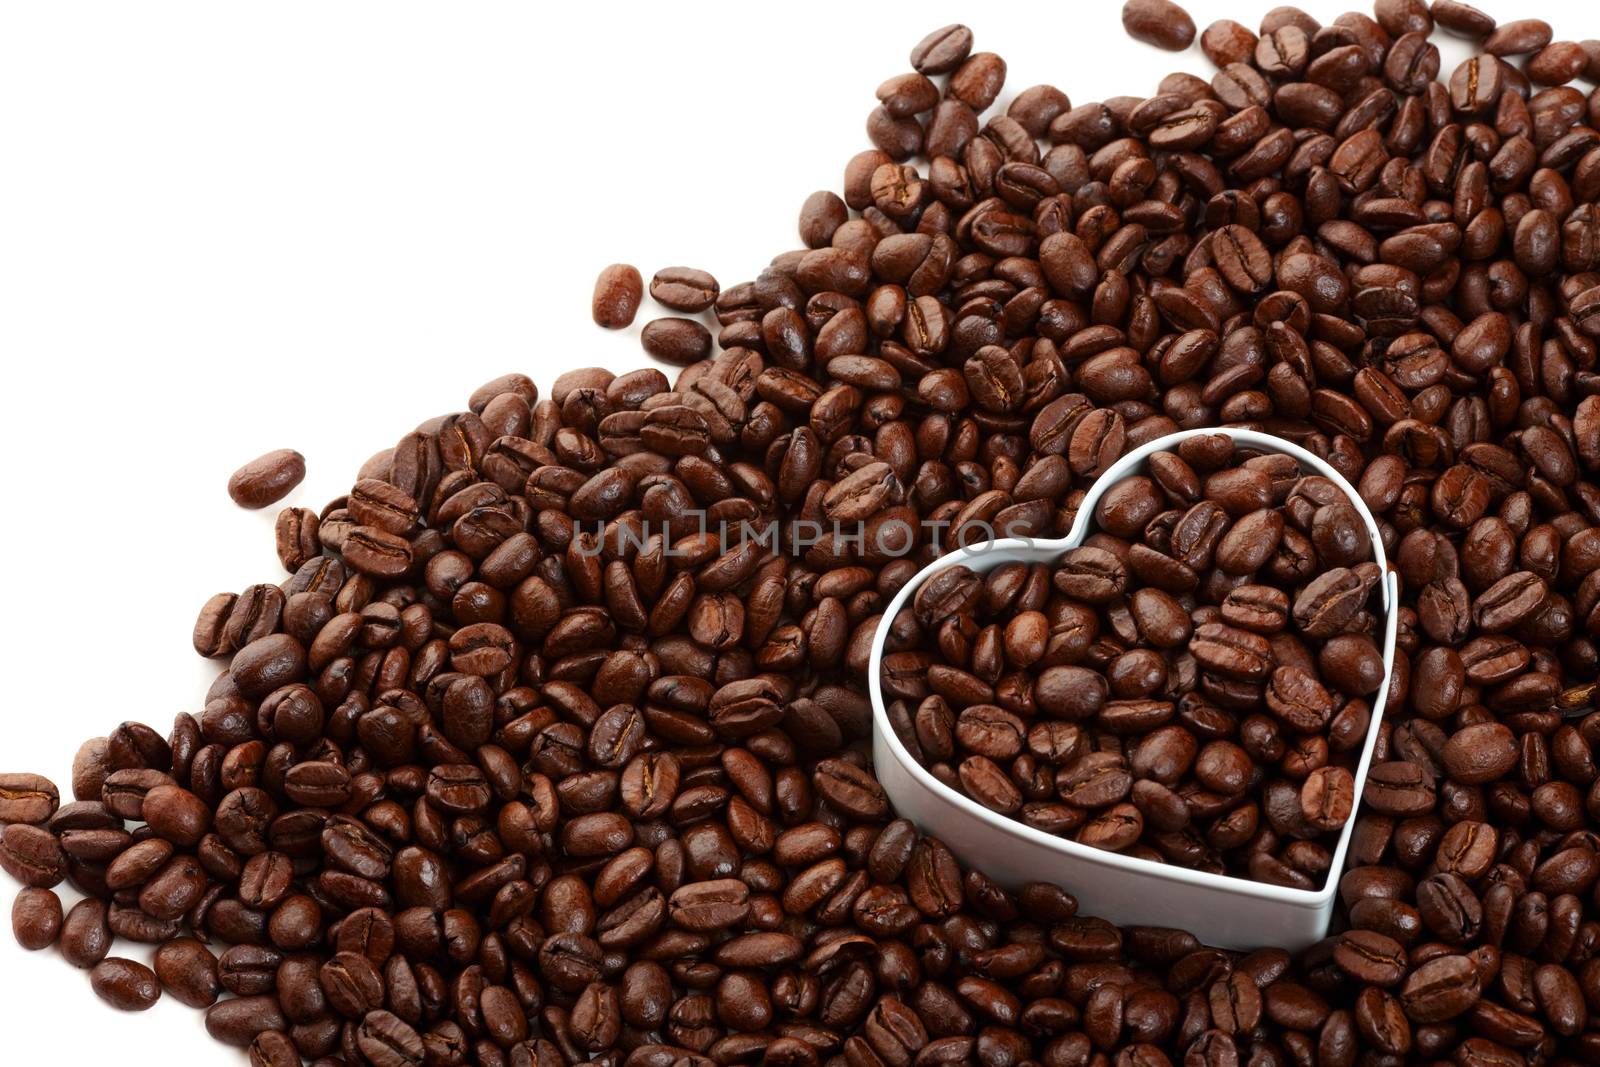 Coffee beans with a heart shape; metaphor for the coffee lovers.